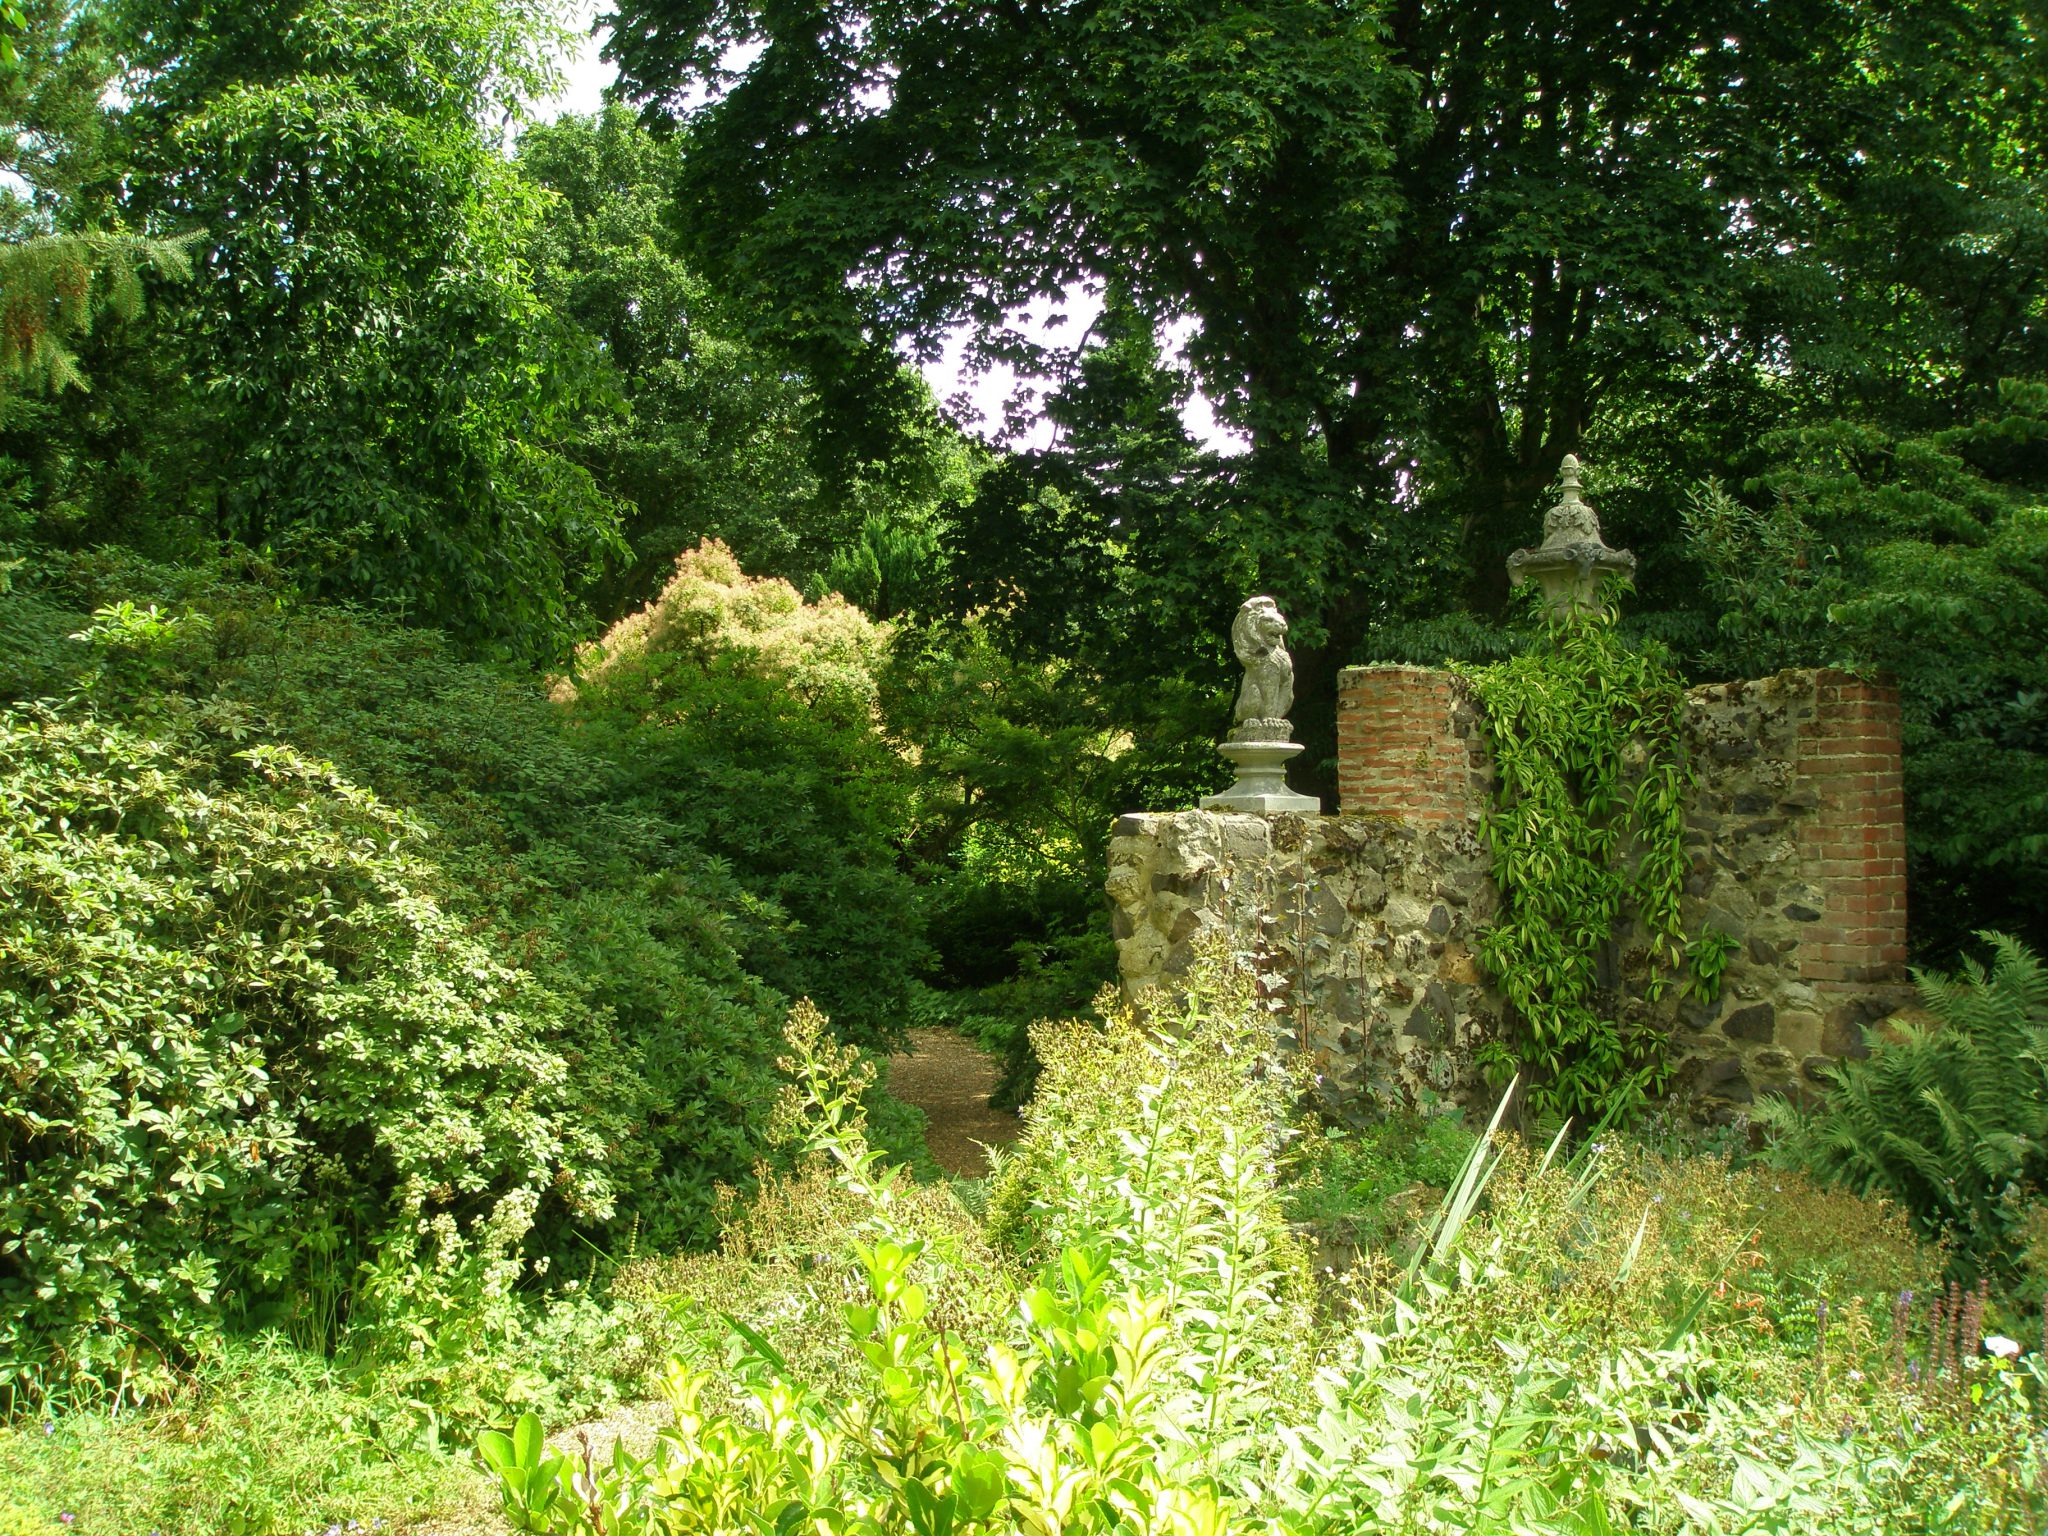 Woodlands behind the Italian Garden. The two acres on the eastern edge of the garden were purchased in 1962.